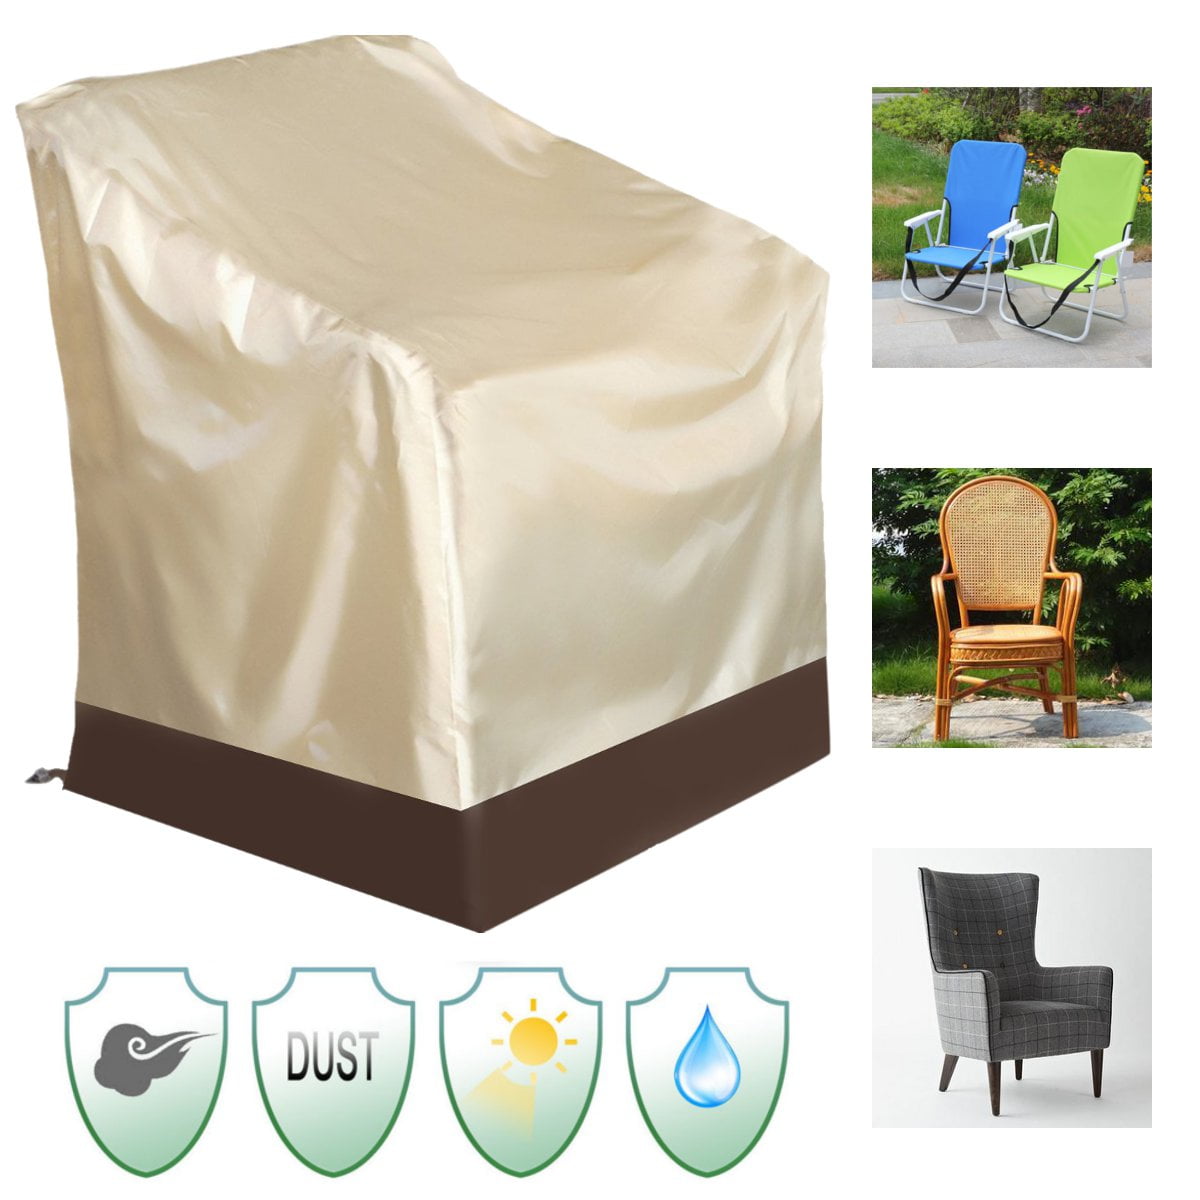 Stacking Chair Cover Quality UV Waterproof Outdoor Garden Patio Furniture Chairs